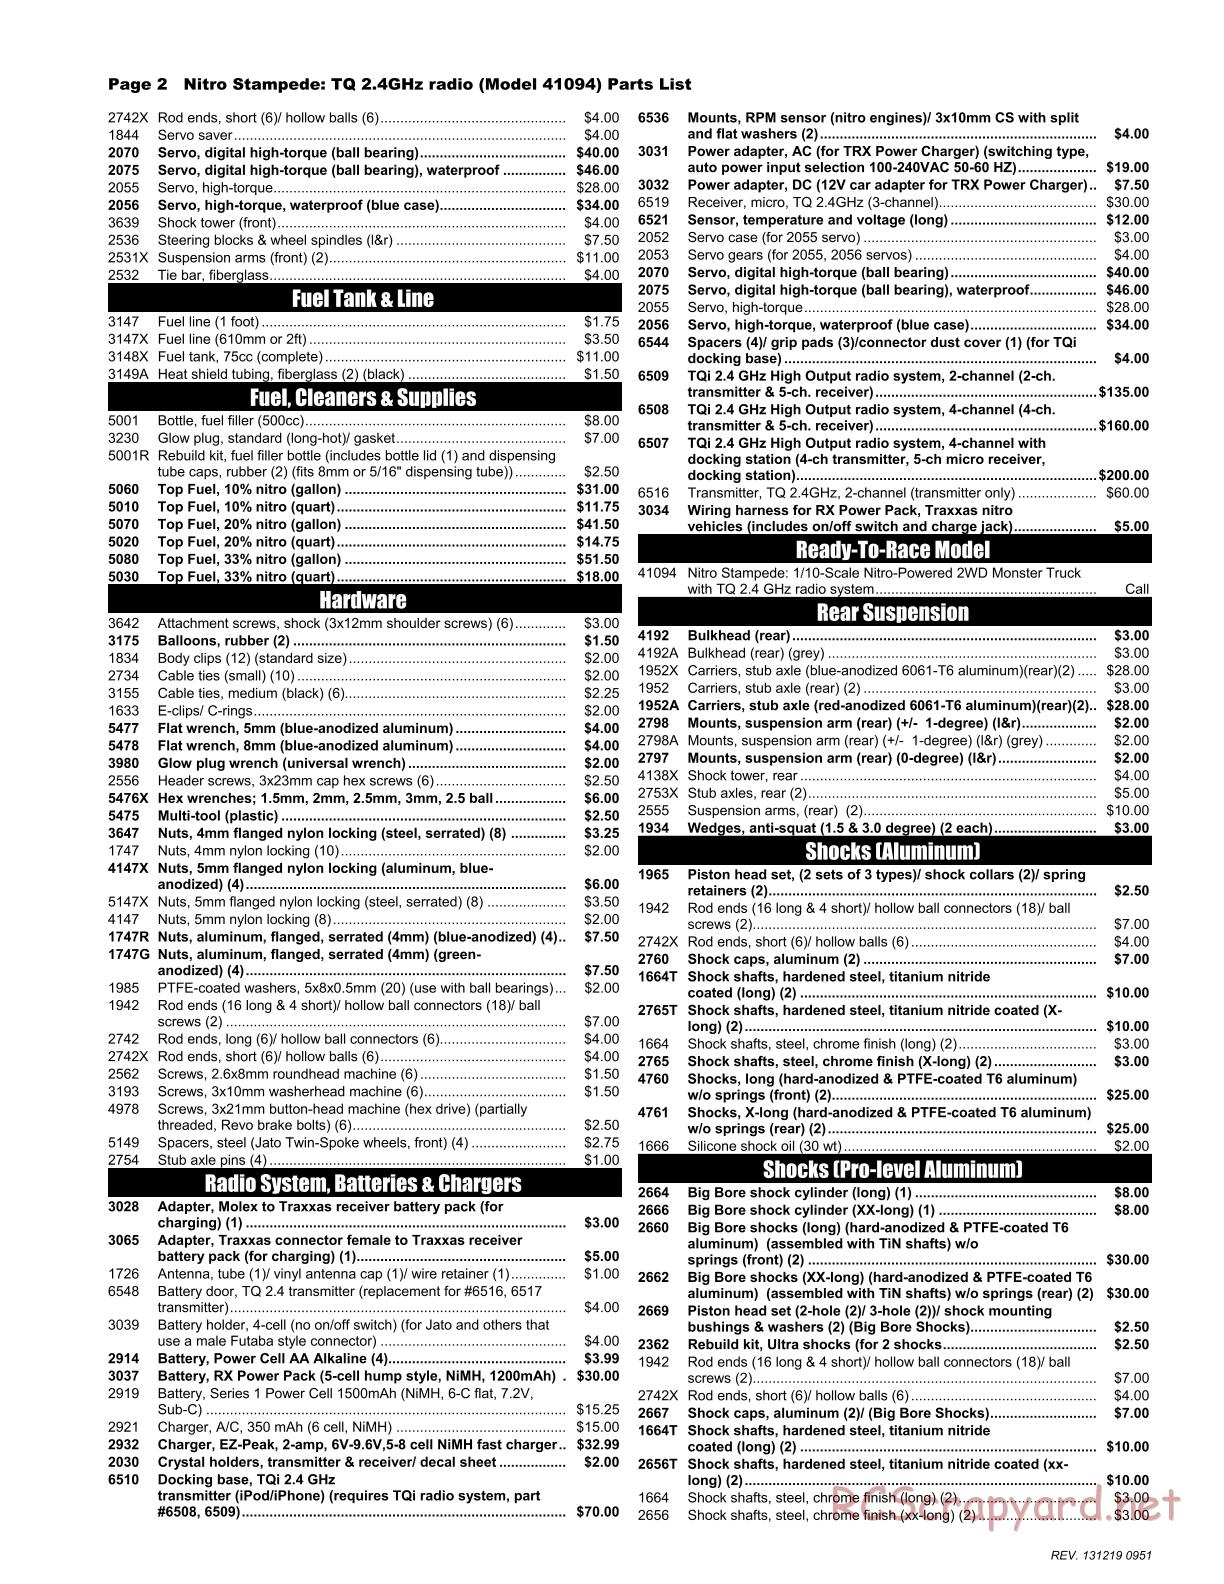 Traxxas - Nitro Stampede (2013) - Parts List - Page 2